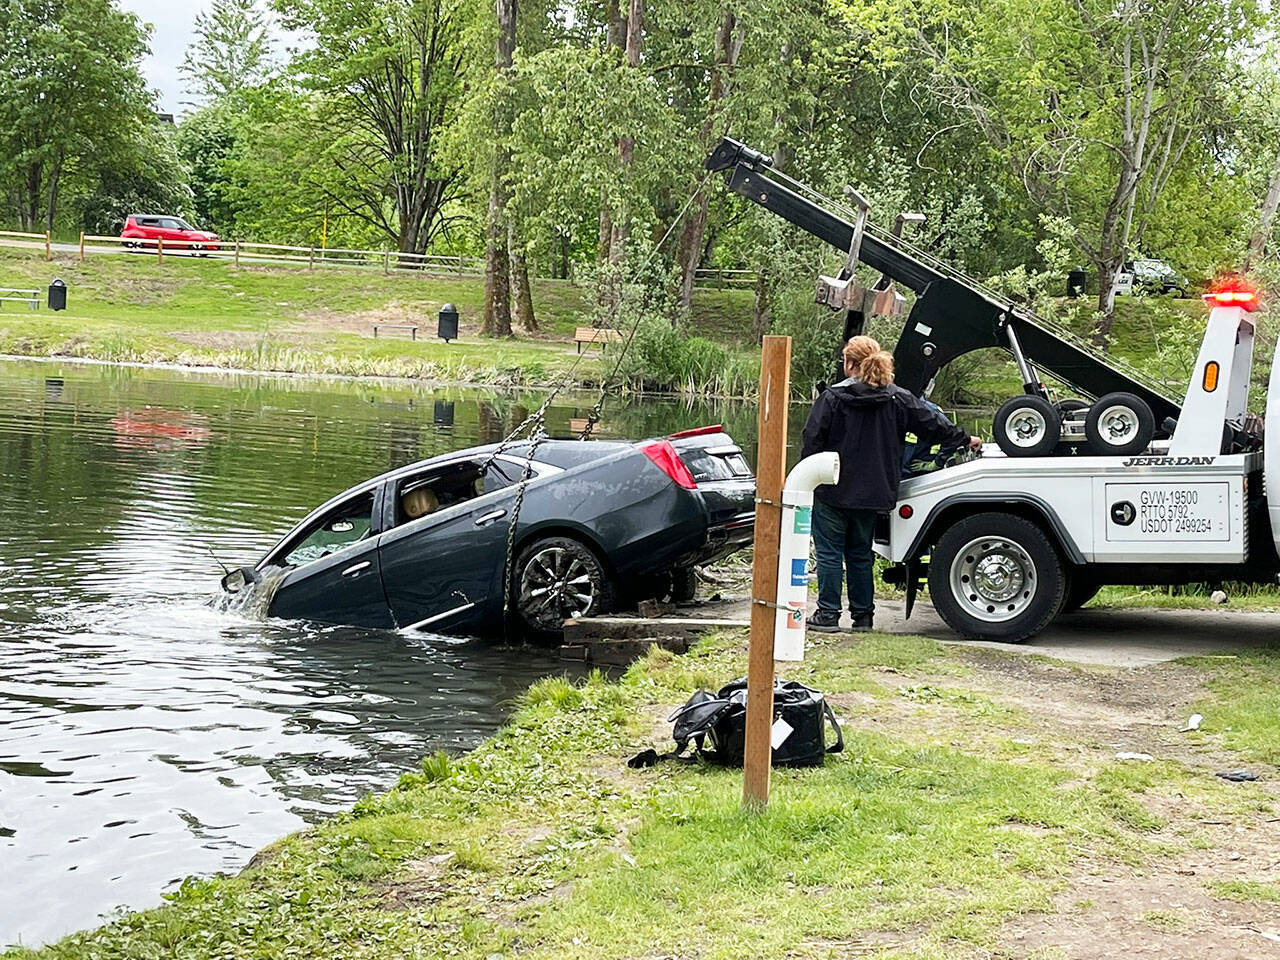 A car is pulled Tuesday morning, May 24 from the Old Fishing Hole in Kent near the Green River. The car’s owner told police it somehow rolled from the parking lot into the water. The owner was not in the car when it rolled. COURTESY PHOTO, Puget Sound Fire